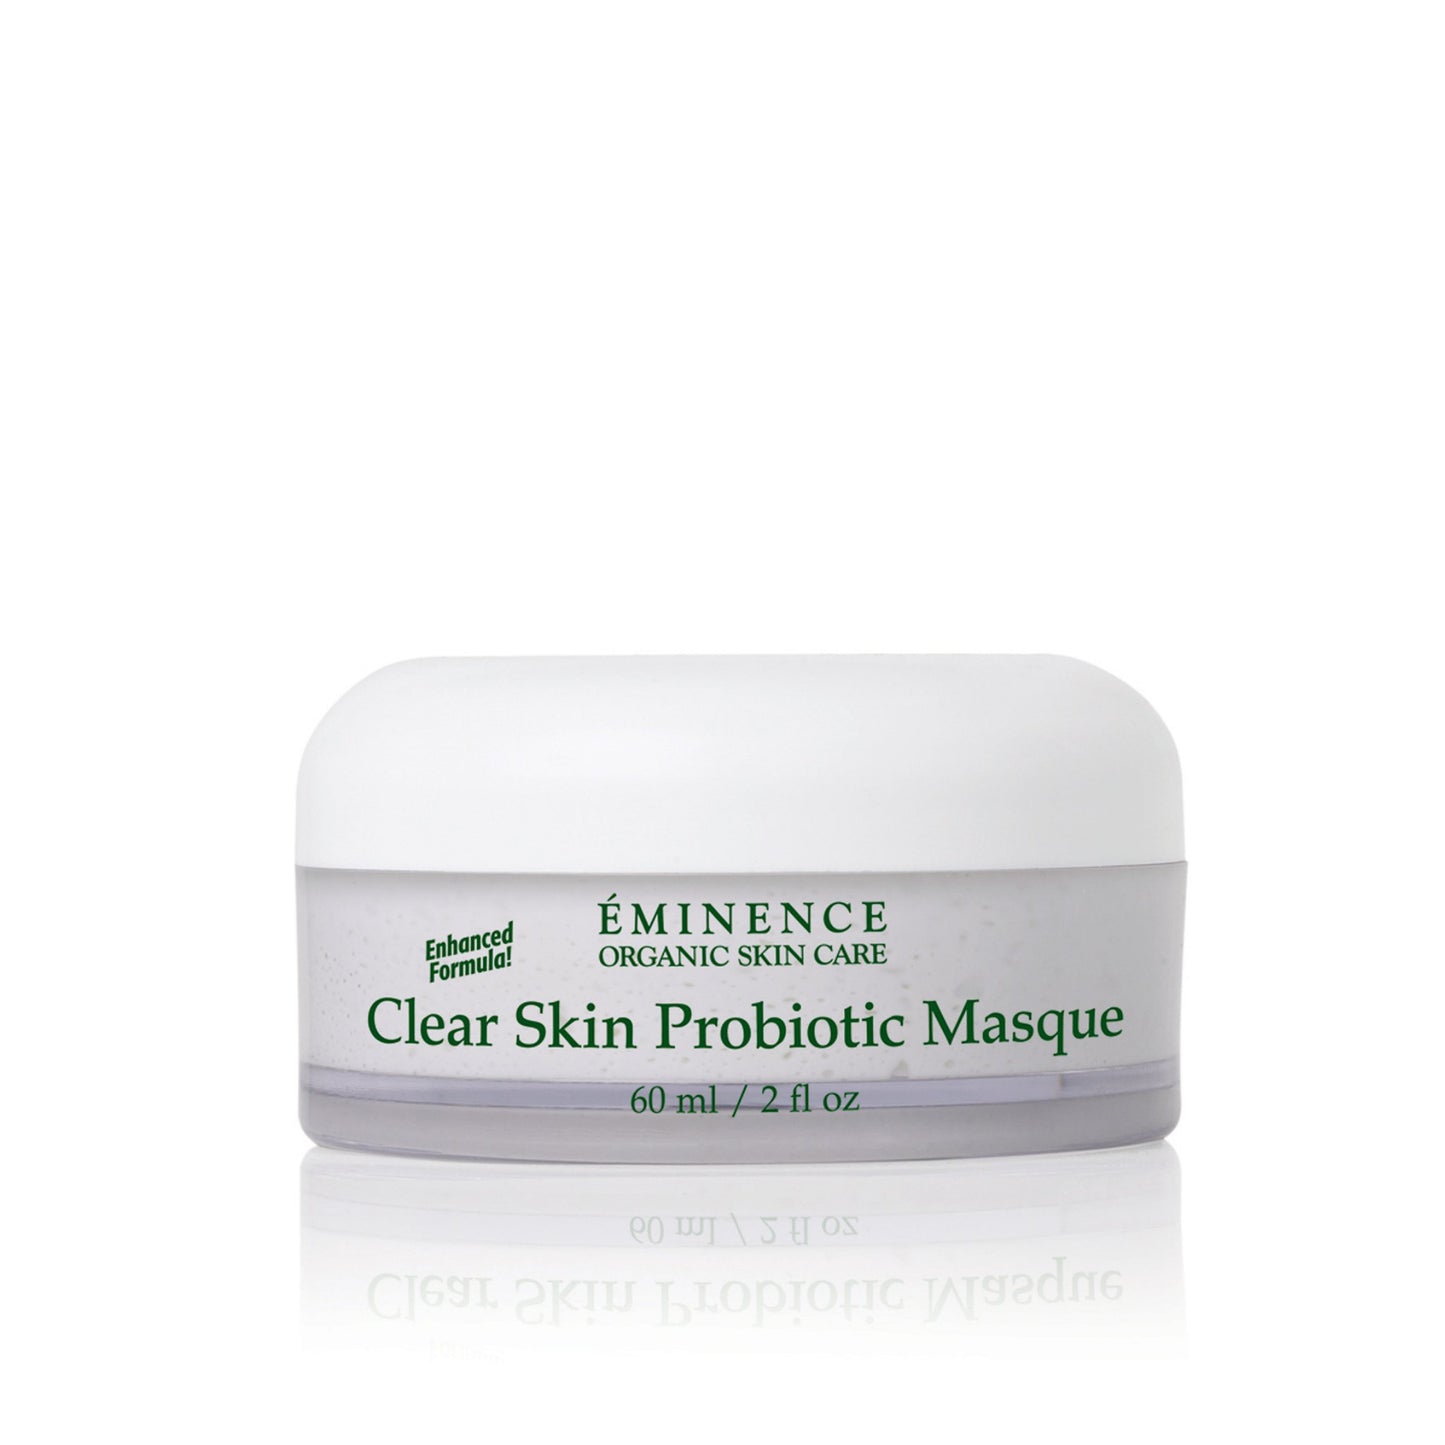 Eminence Organics - Eminence Clear Skin Probiotic Masque - ORESTA clean beauty simplified